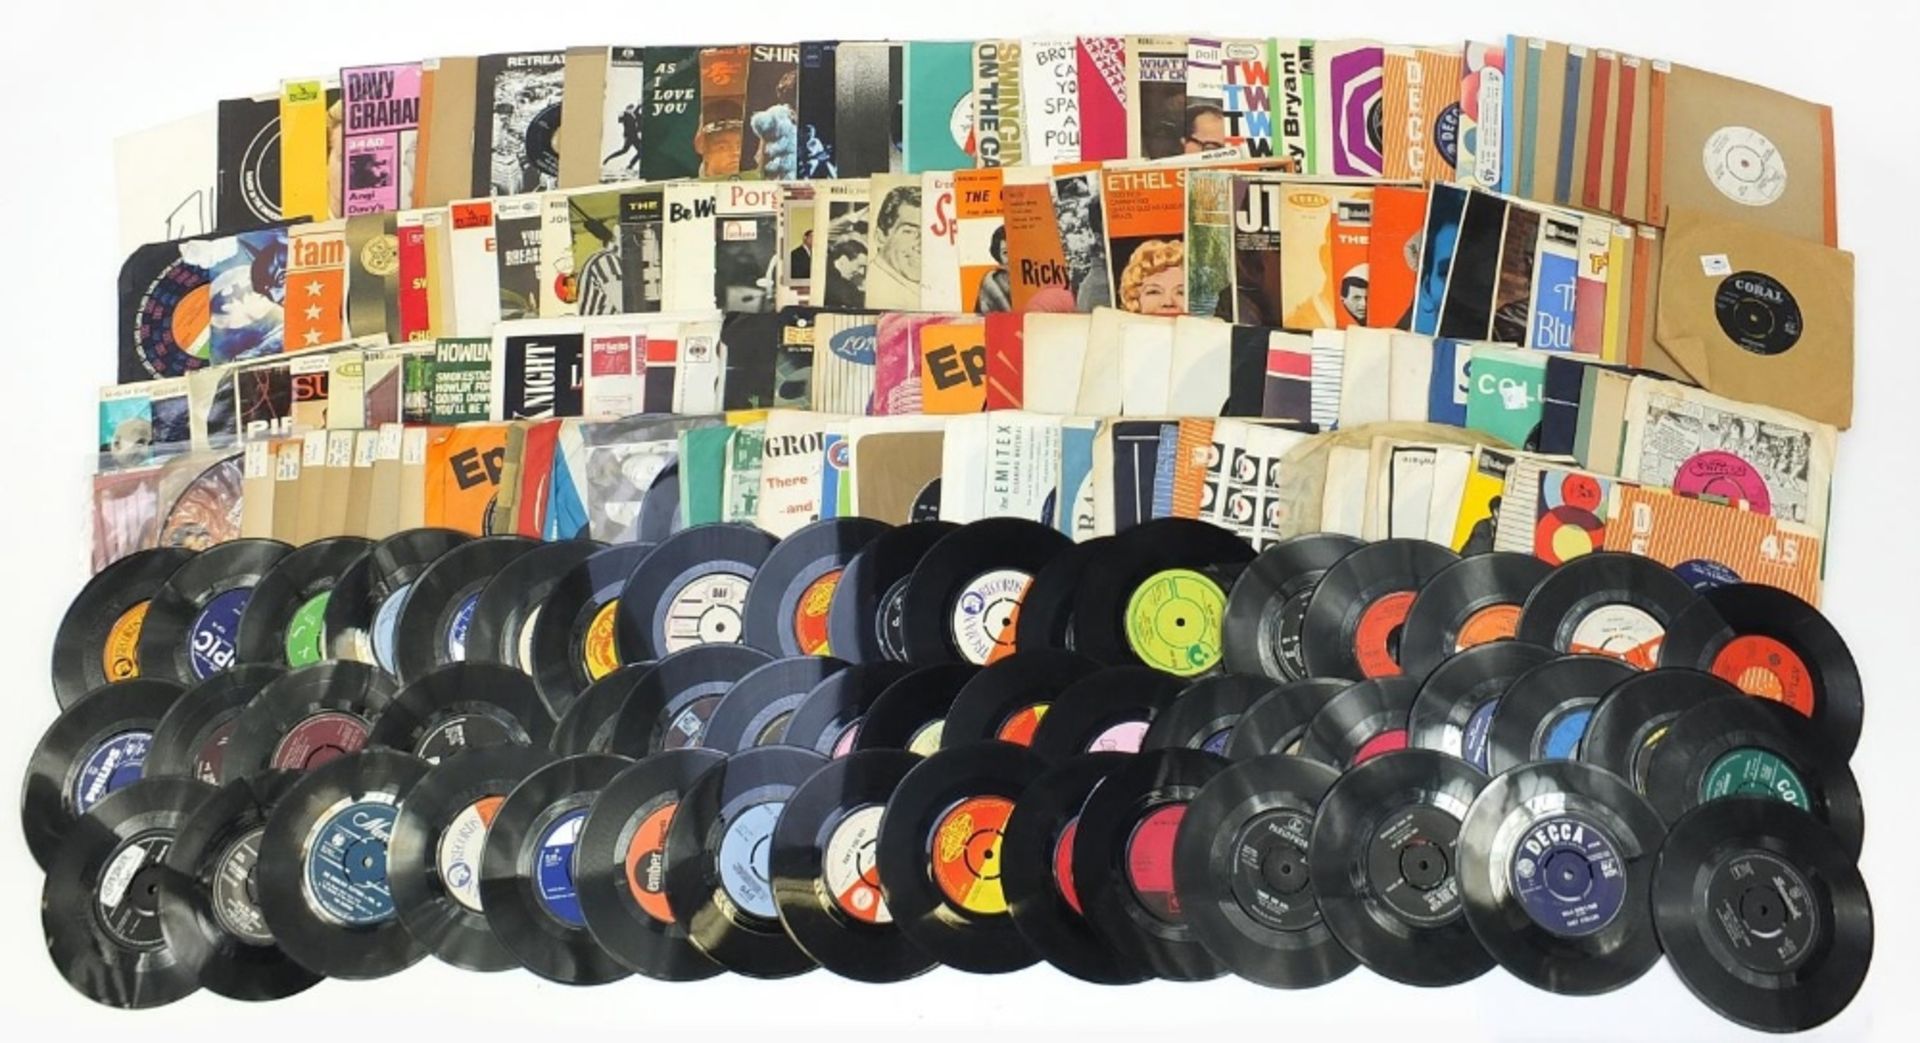 45rpm records including Buddy Holly, Status Quo, Joyce Bond, The Walker Brothers, Jimi Hendrix